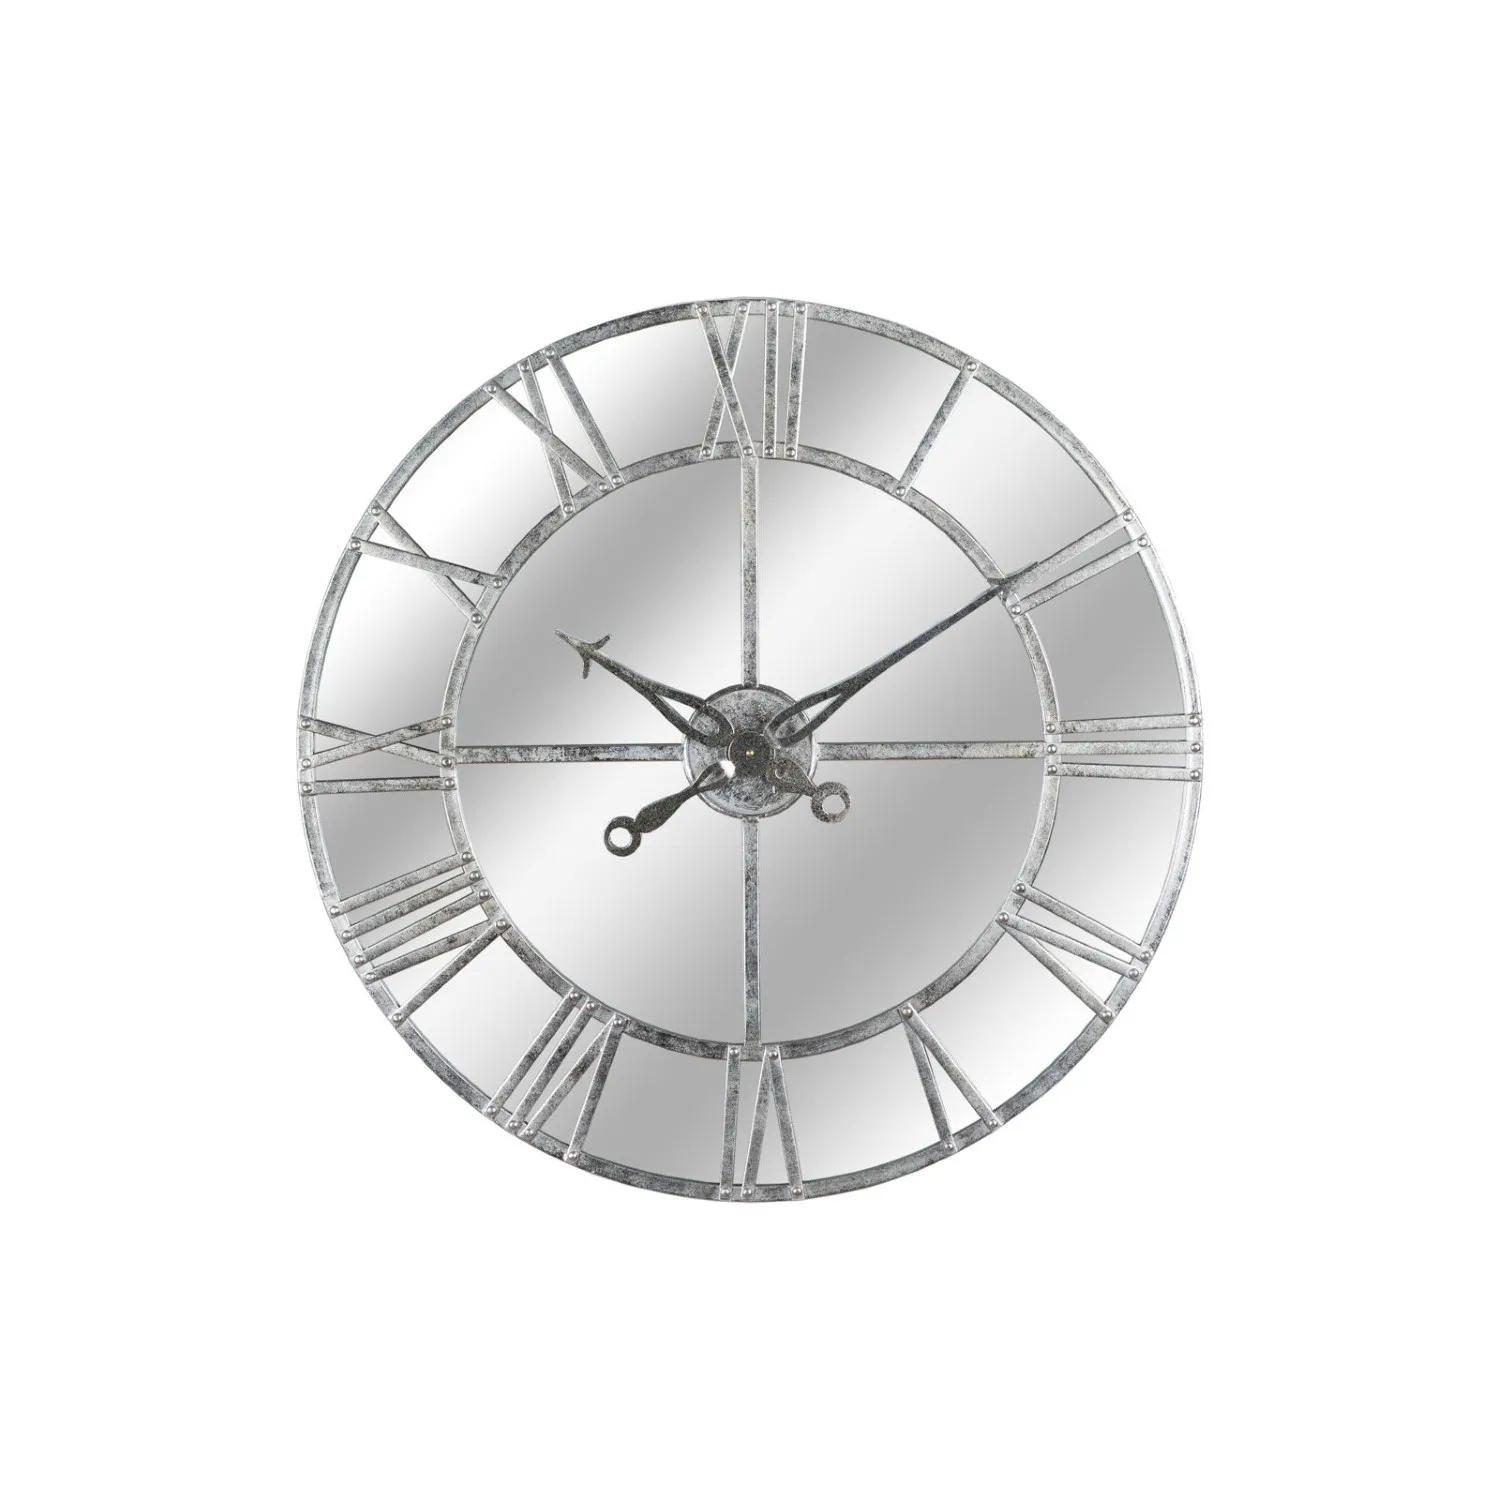 Traditional Style Large Round Silver Foil Mirrored Glass Wall Clock 85cm Diameter